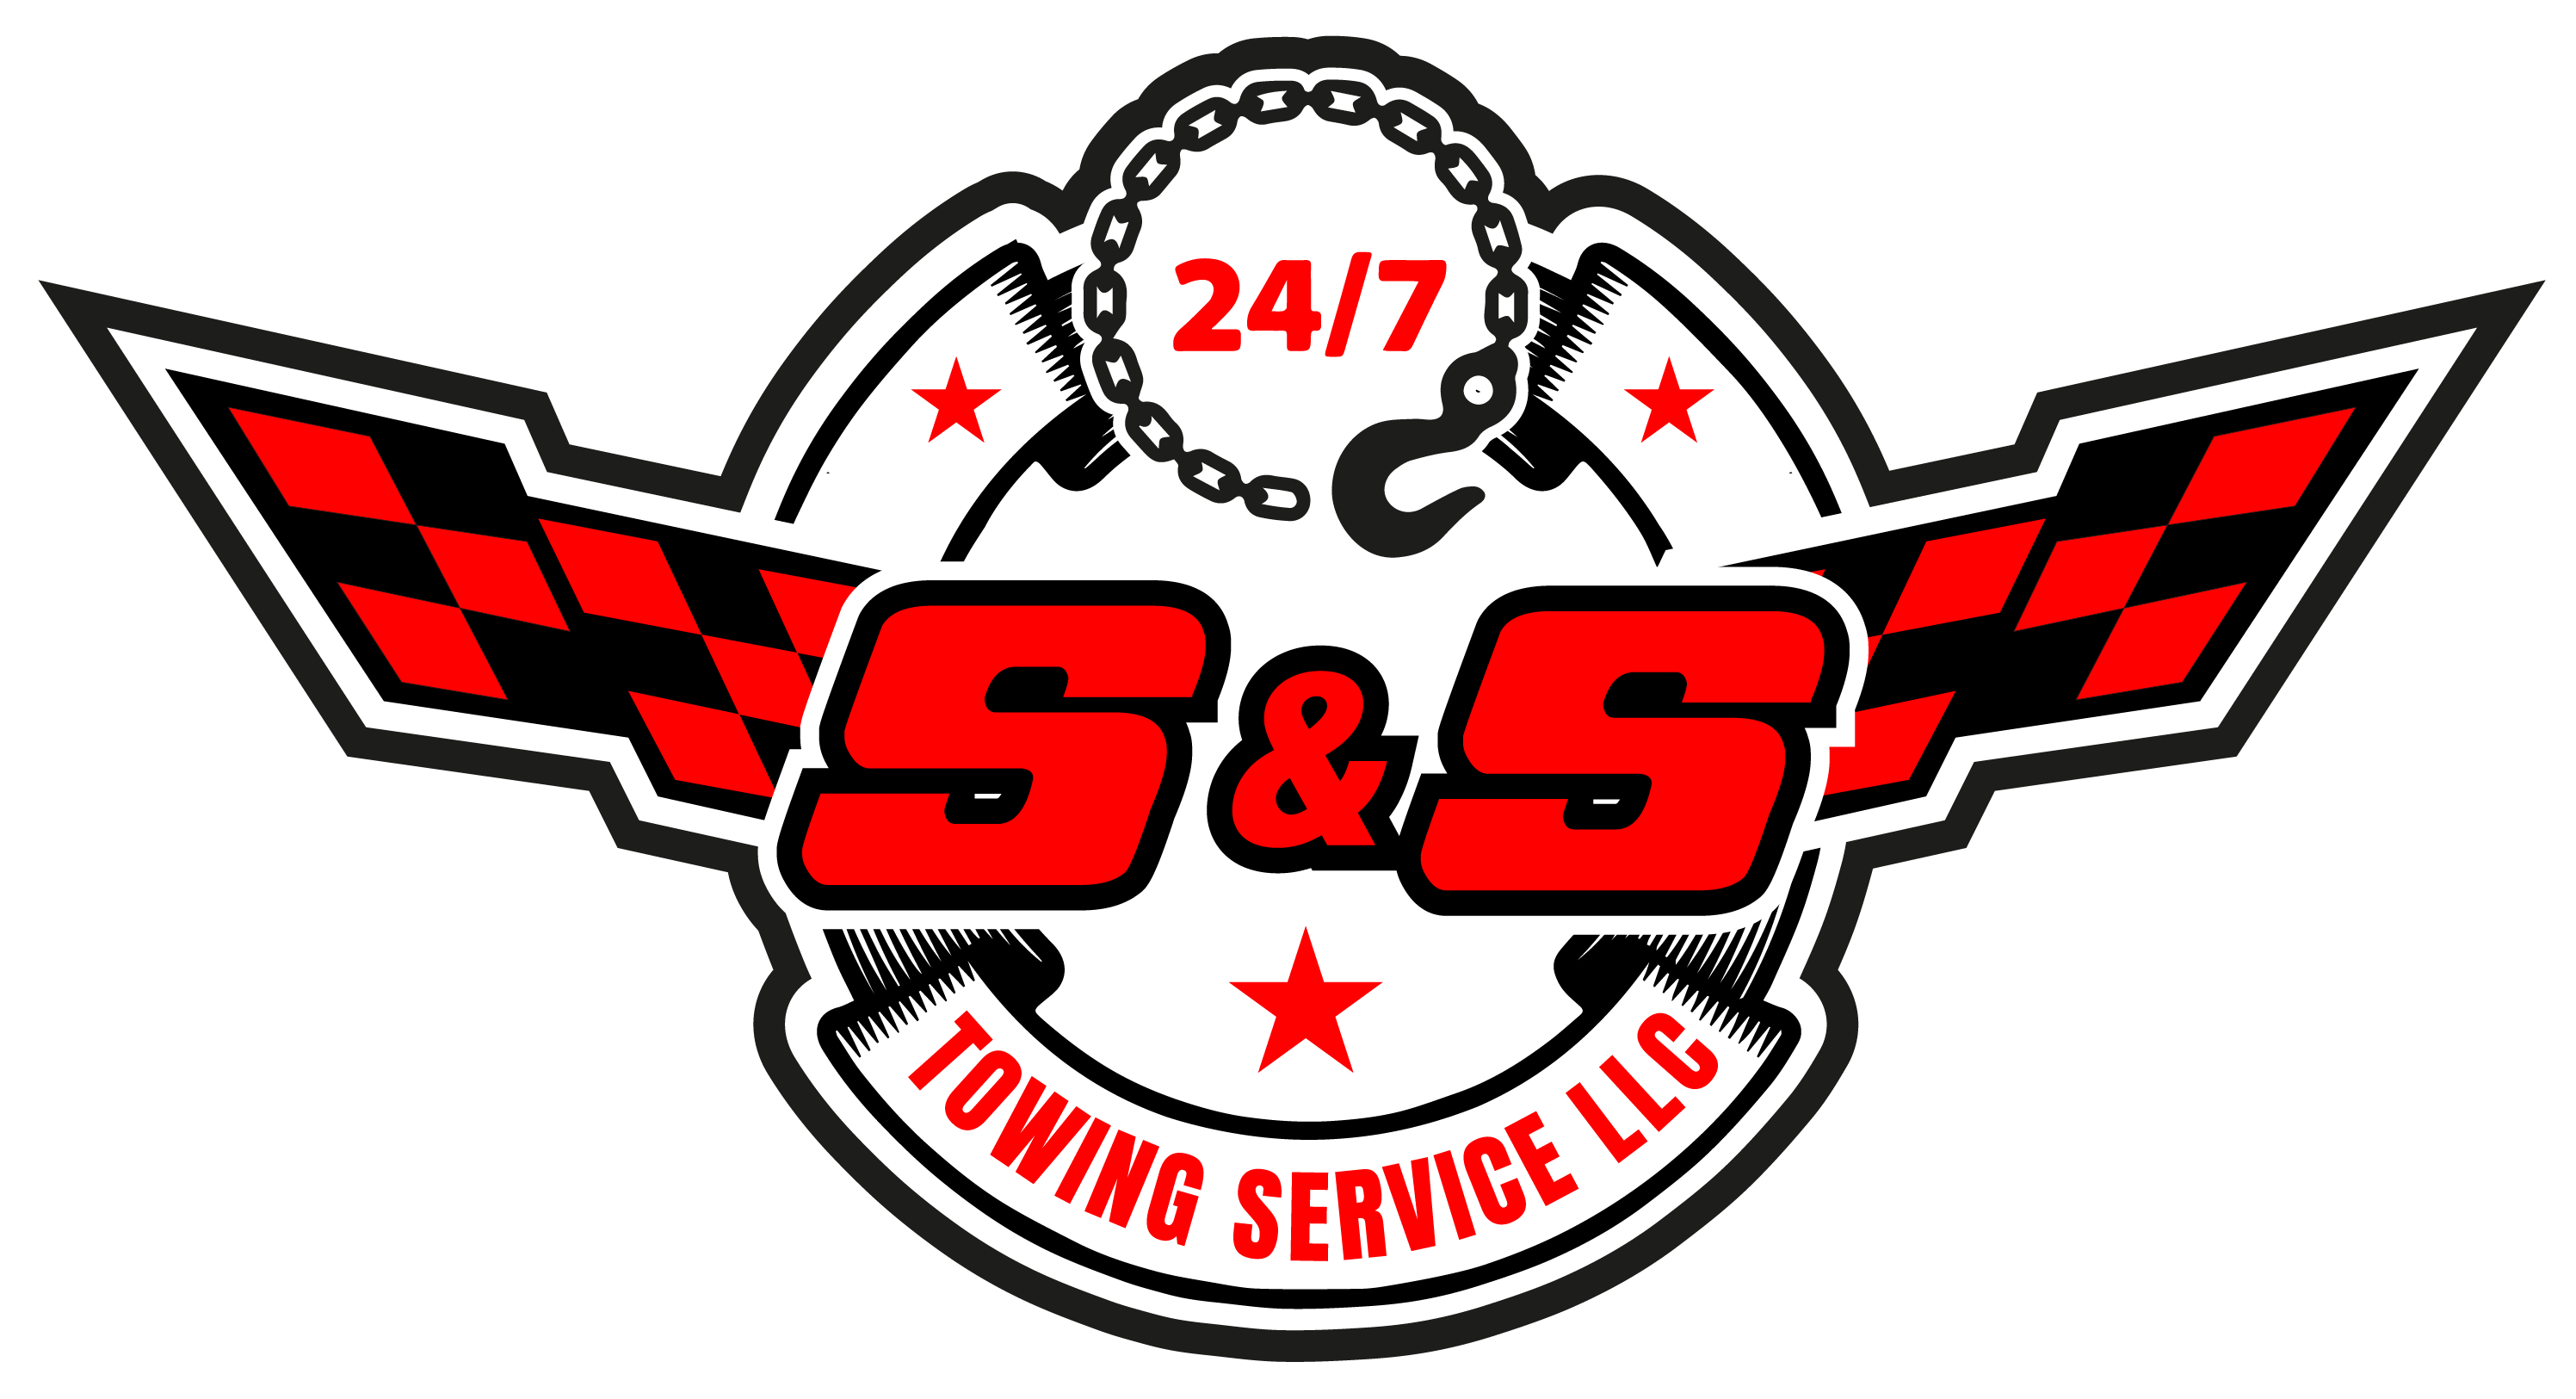 S&S TOWING SERVICES LLC